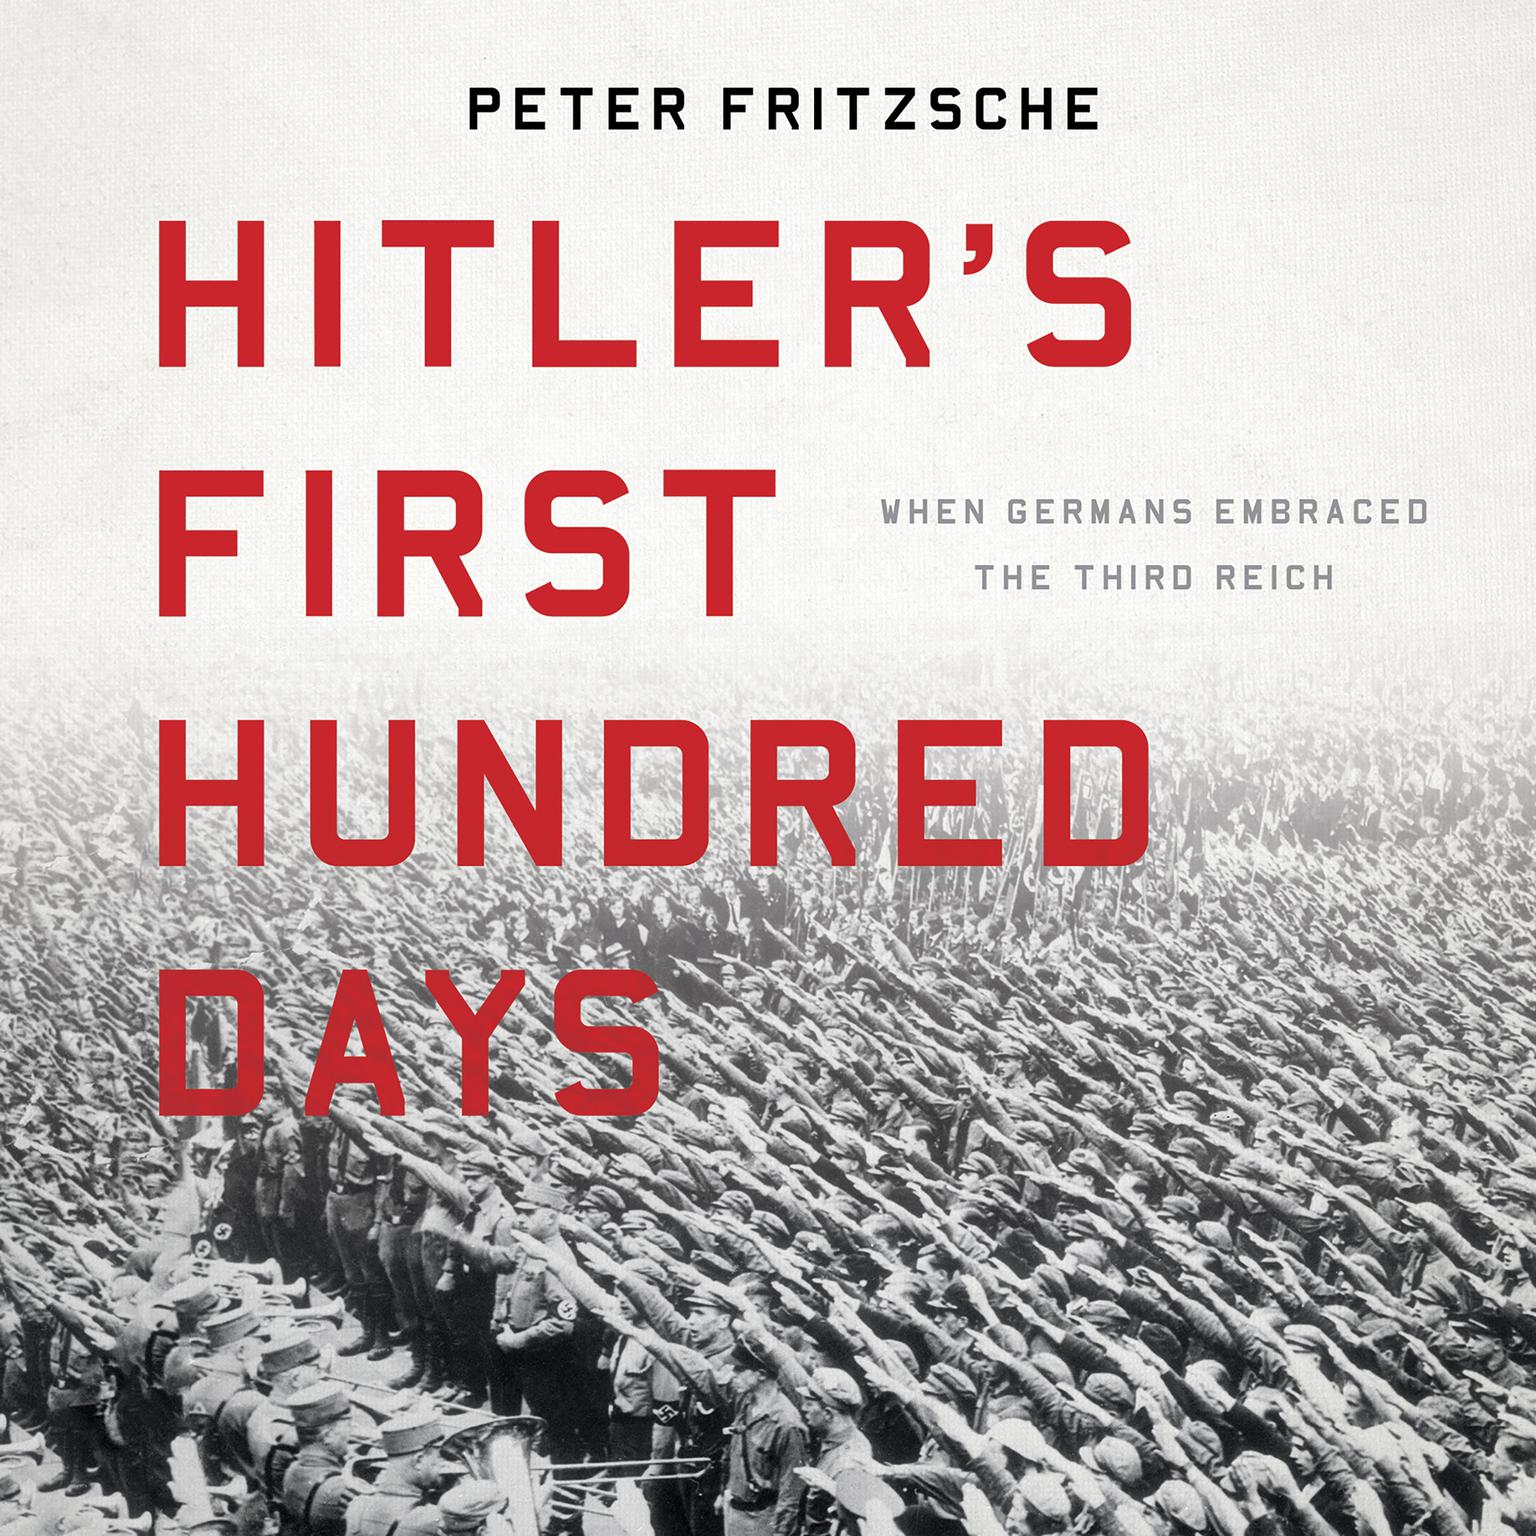 Hitlers First Hundred Days: When Germans Embraced the Third Reich Audiobook, by Peter Fritzsche